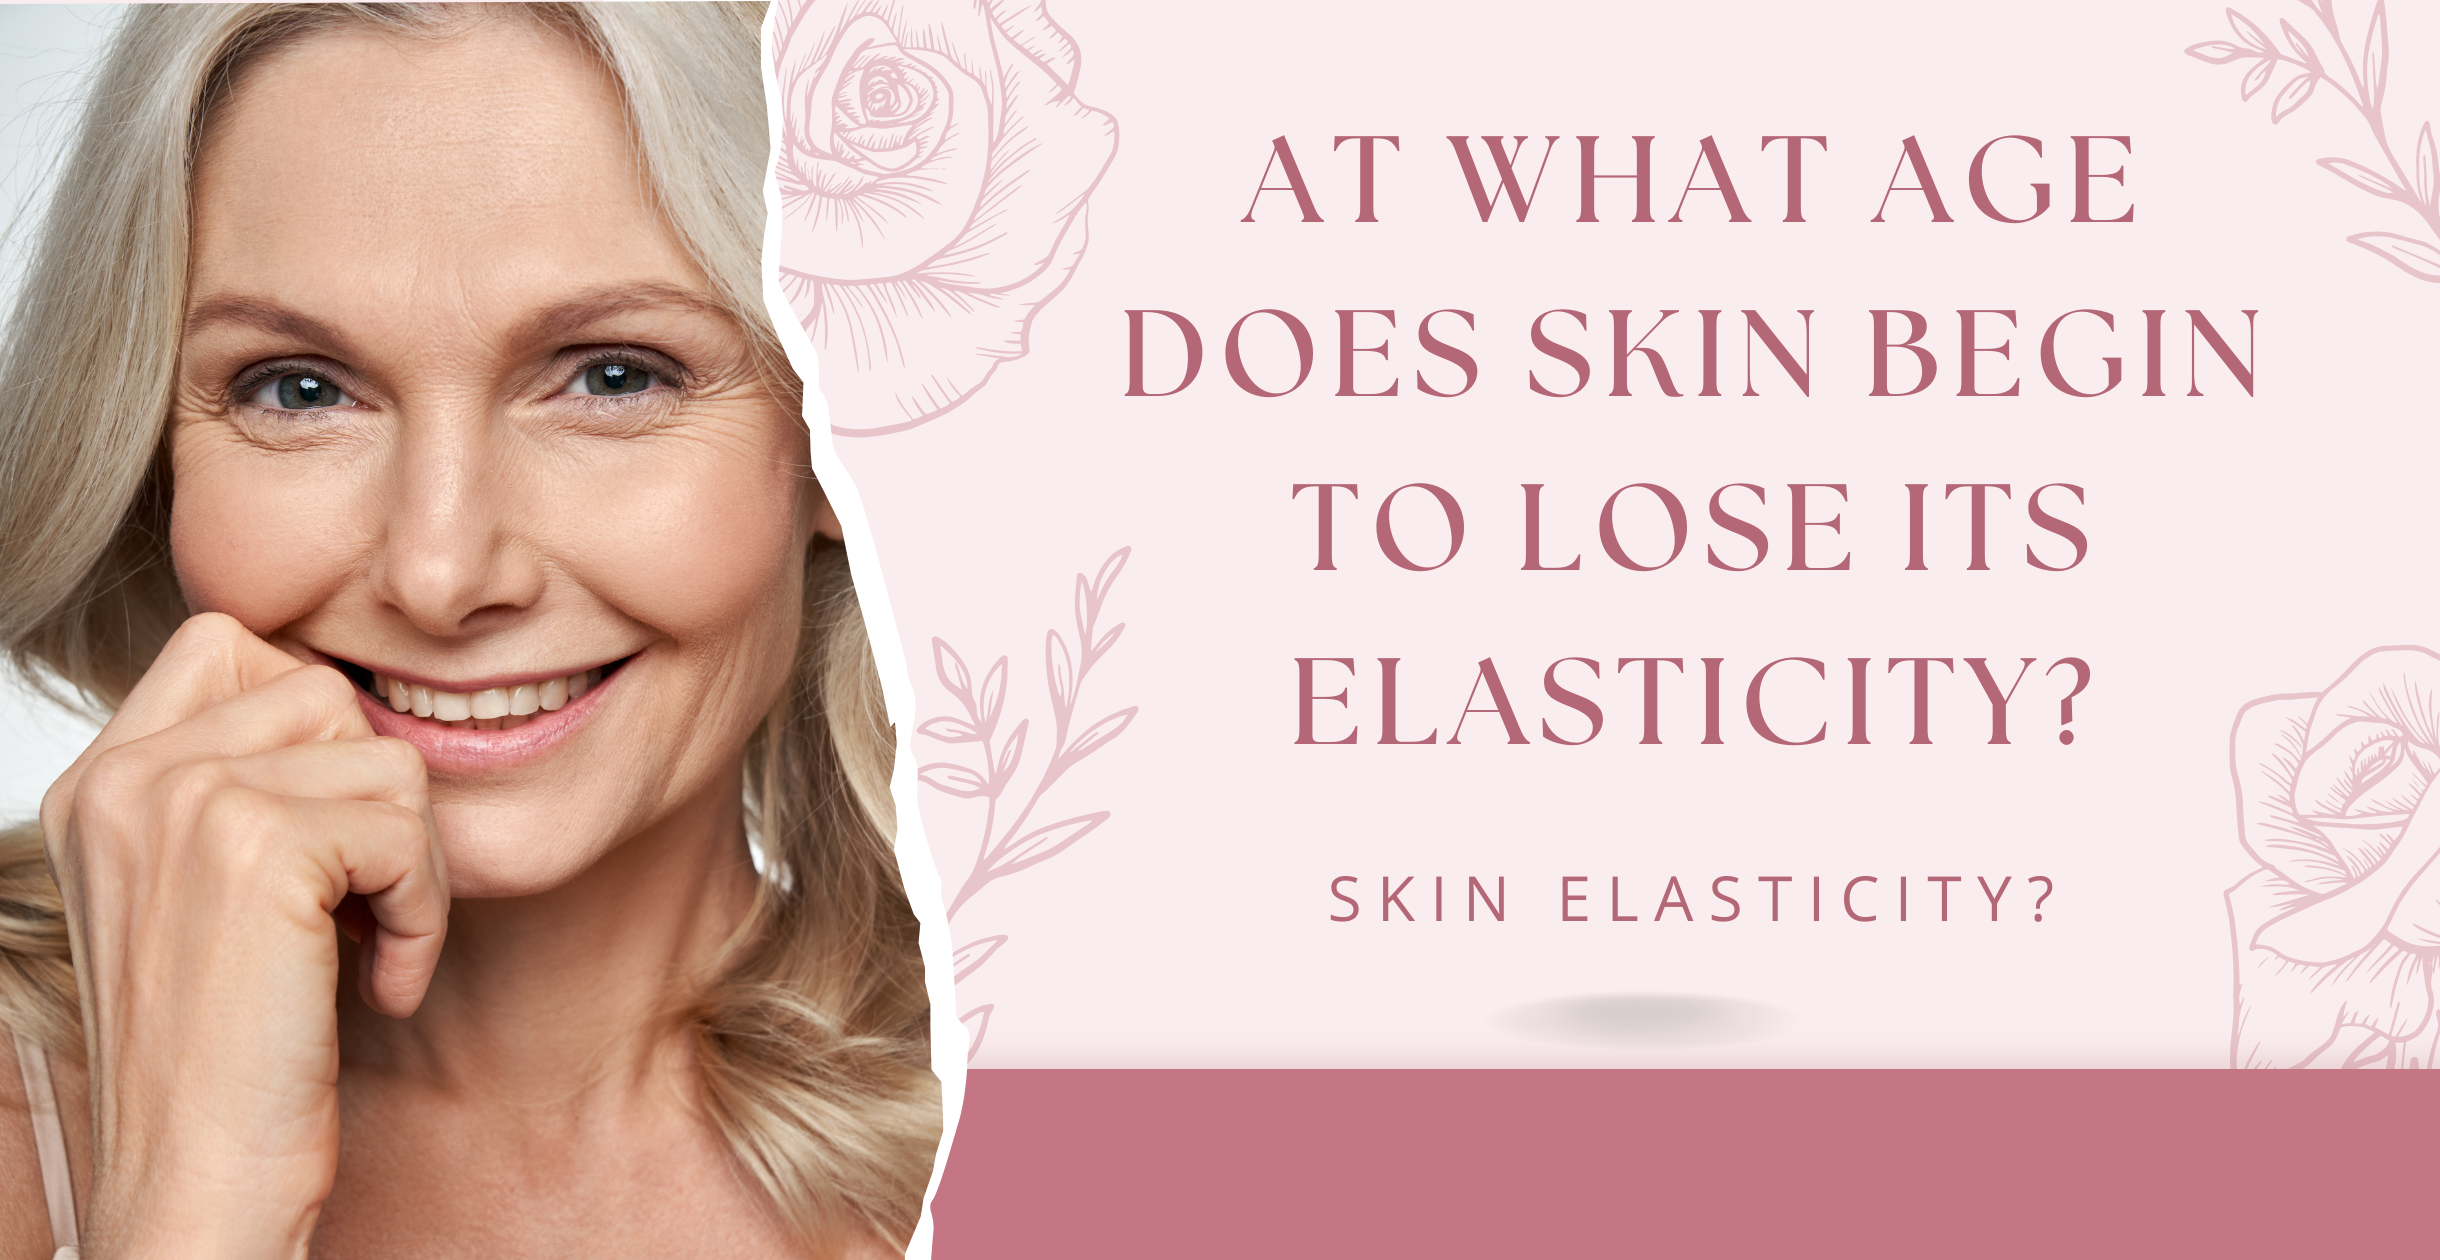 At What Age Does Skin Begin to Lose Its Elasticity?